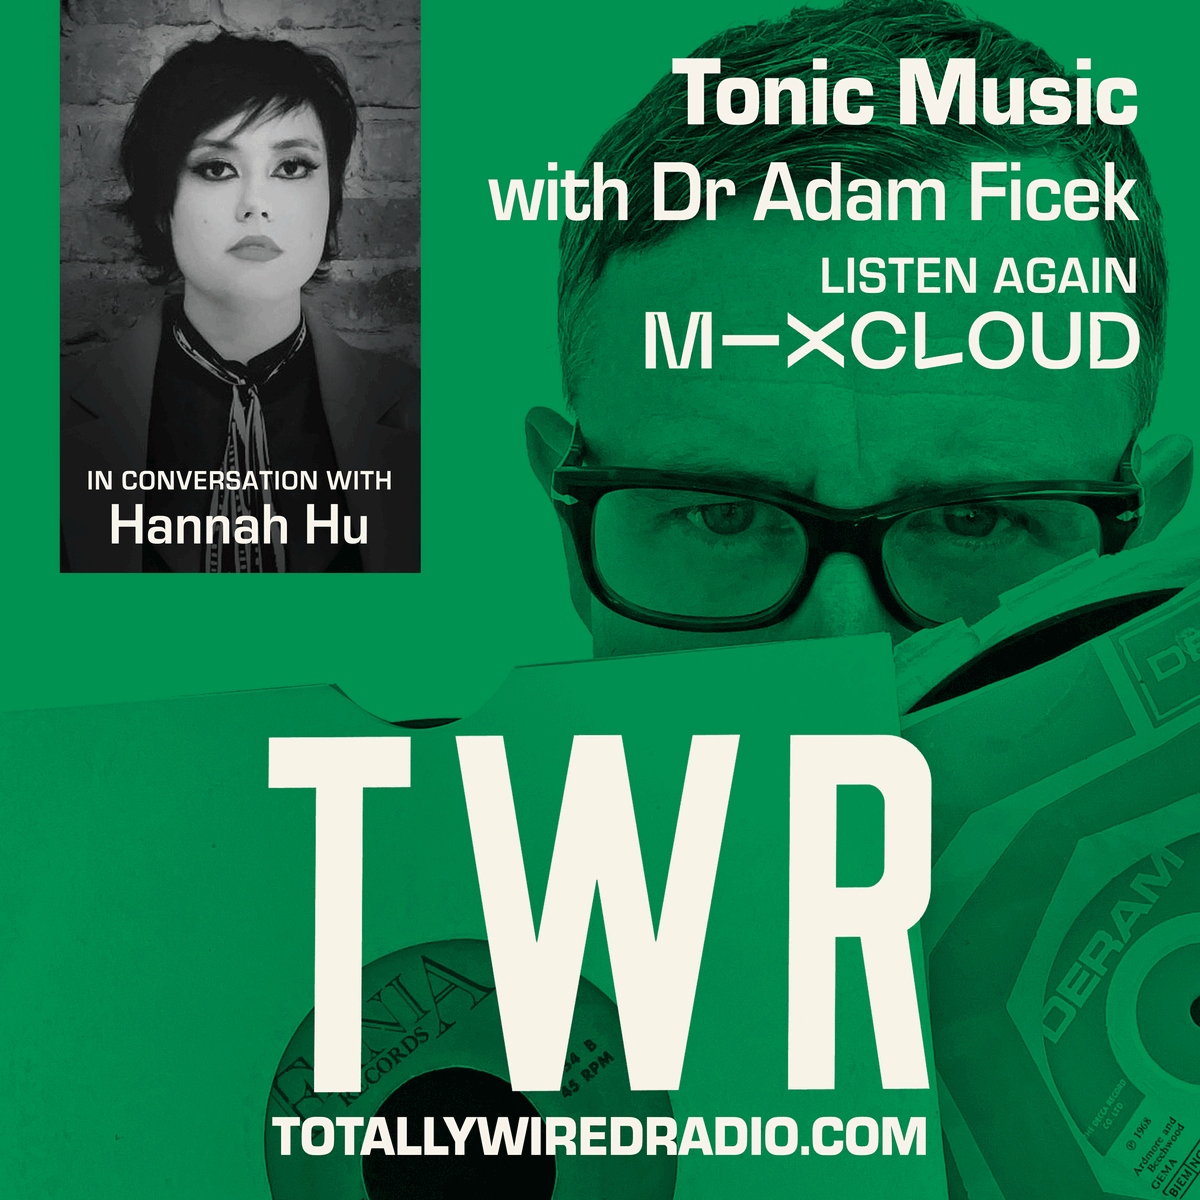 Listen again to this month's Tonic Music radio show hosted by @adamficek, with guest @Iamhannahhu.
→ mixcloud.com/Tonic_Music_fo…
@TotallyWiredRAD

#MentalHealth #Music #Tonic #NeverMindTheStigma #TonicRider